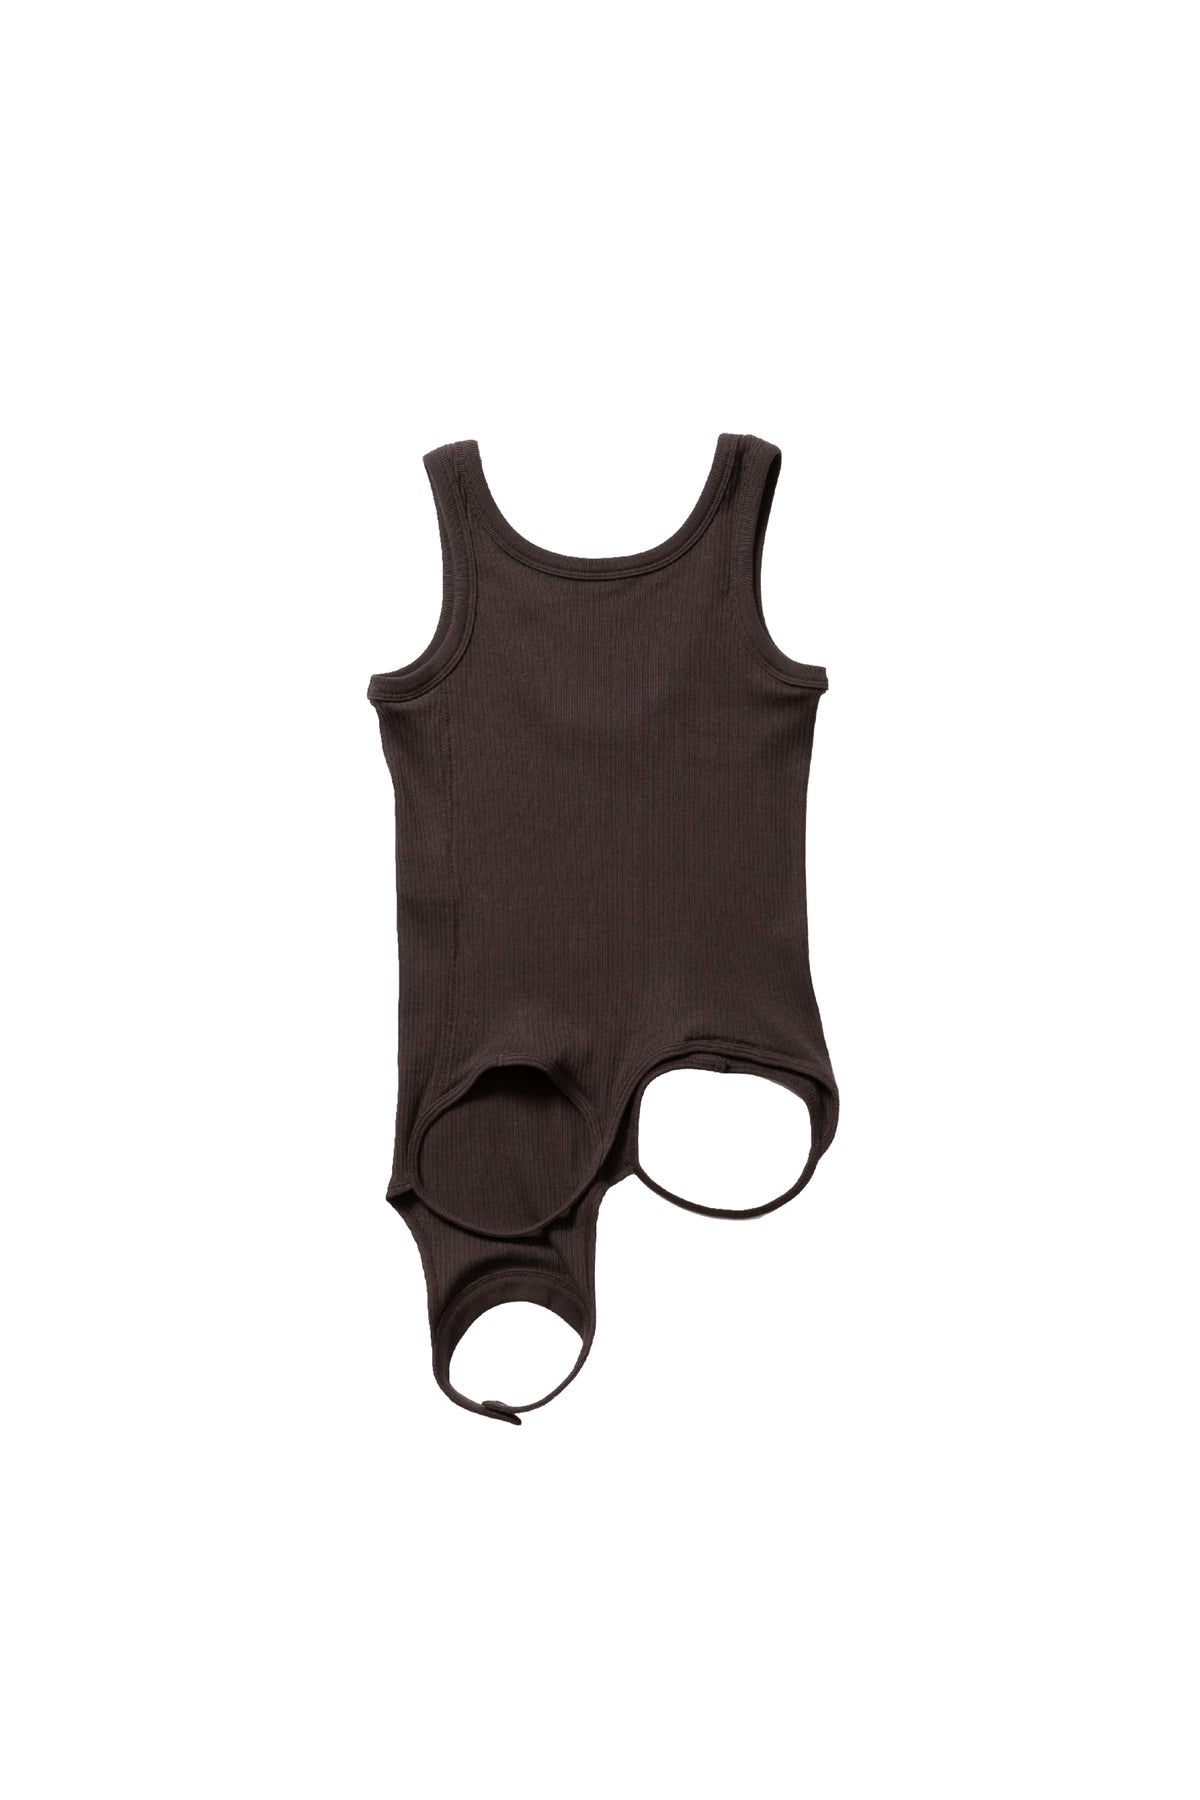 DOUBLE-END SHEER RIB JERSEY TANK TOP / CHARCOAL